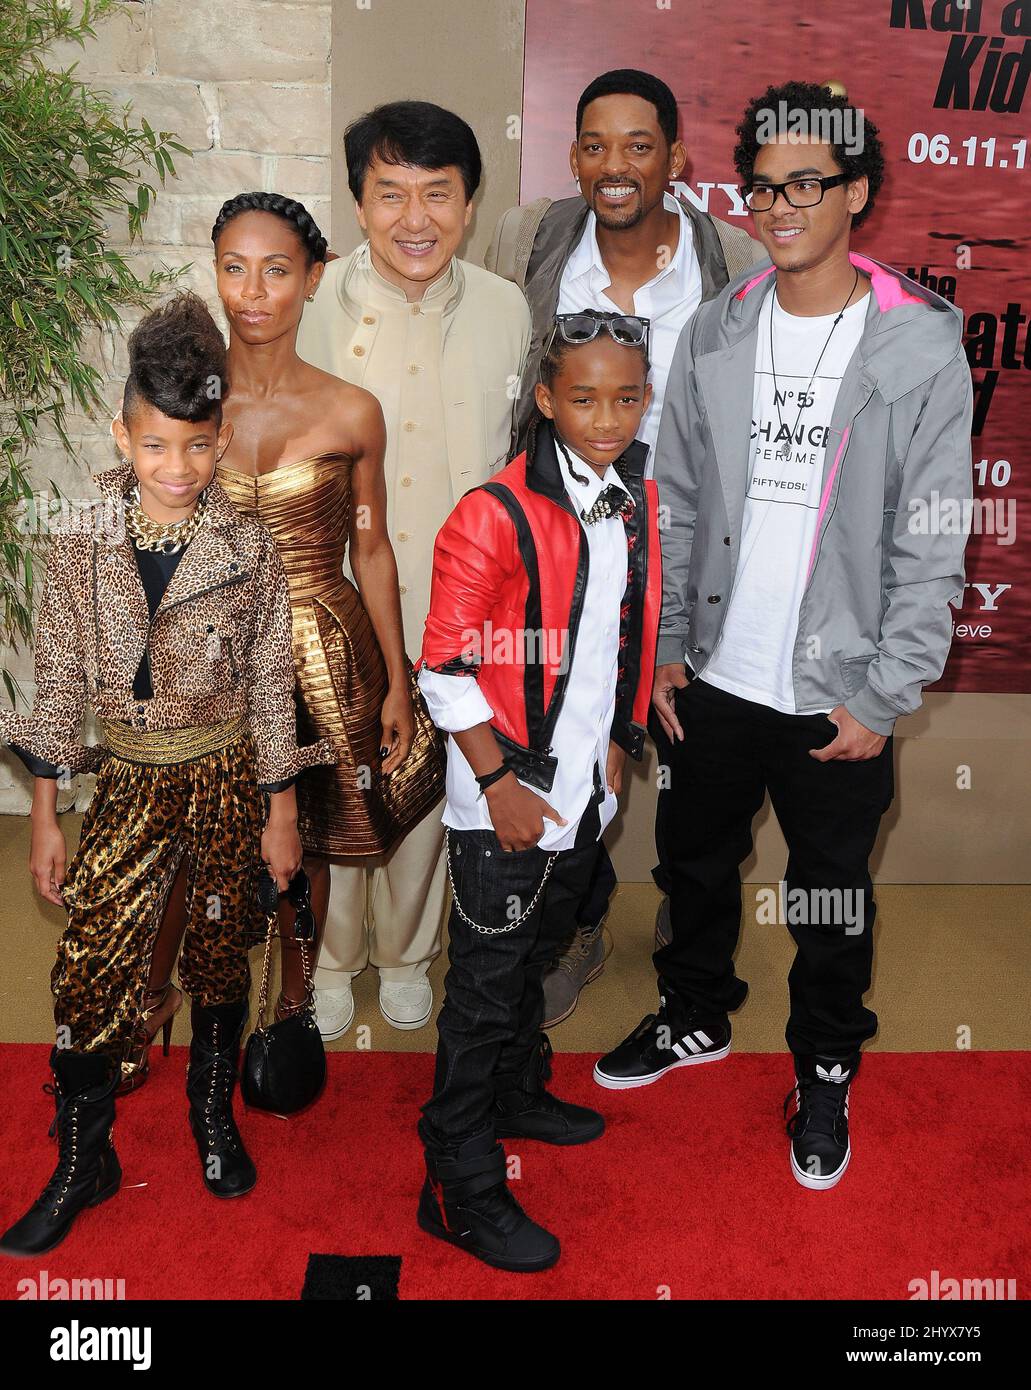 Will Smith, Jada Pinkett Smith, Jackie Chan, Trey Smith, Jaden Smith and Willow Smith at the premiere of 'The Karate Kid' held at Mann Village Theatre in Los Angeles, USA. Stock Photo